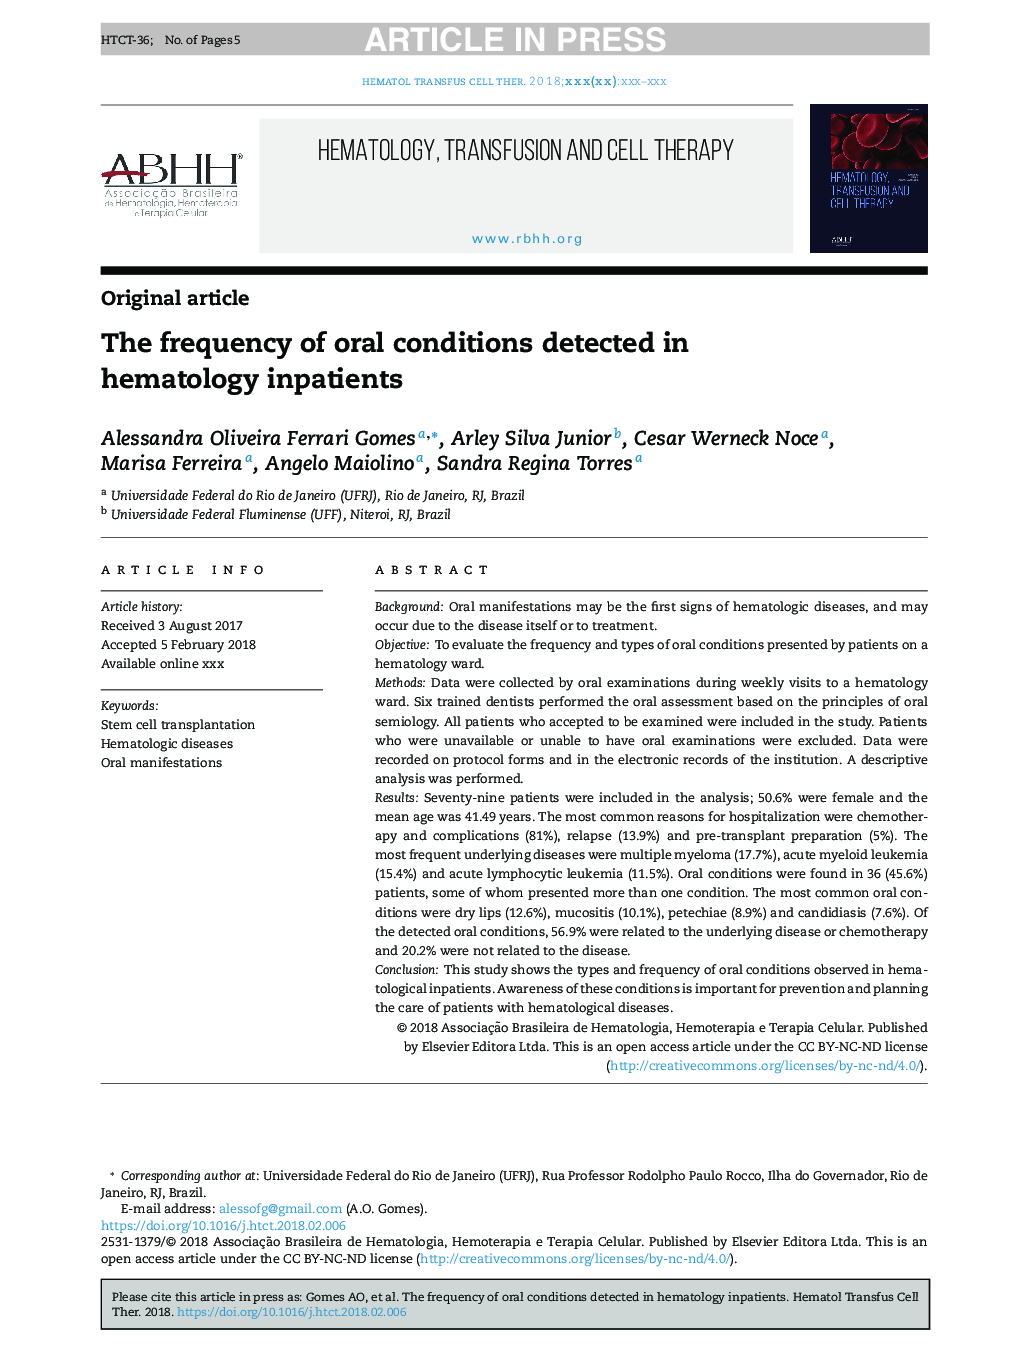 The frequency of oral conditions detected in hematology inpatients